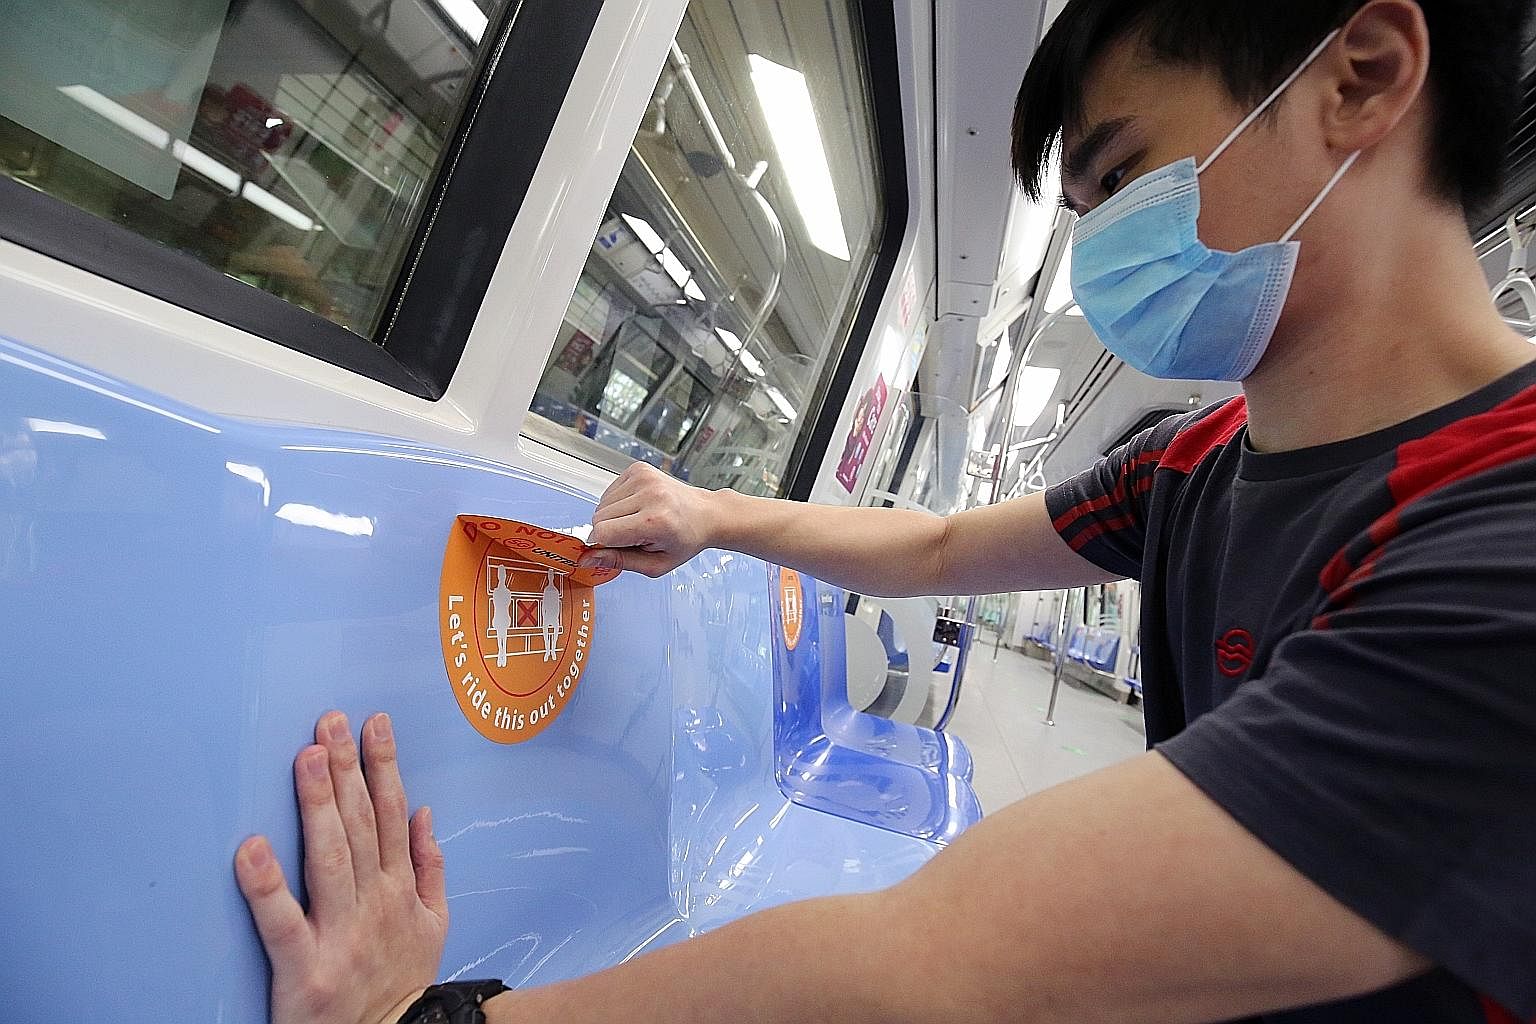 An SMRT employee removing a safe distancing sticker from an MRT train seat yesterday ahead of the end of the circuit breaker. The stickers are being removed as physical distancing on trains and buses will be hard once crowds return. Seat markers will